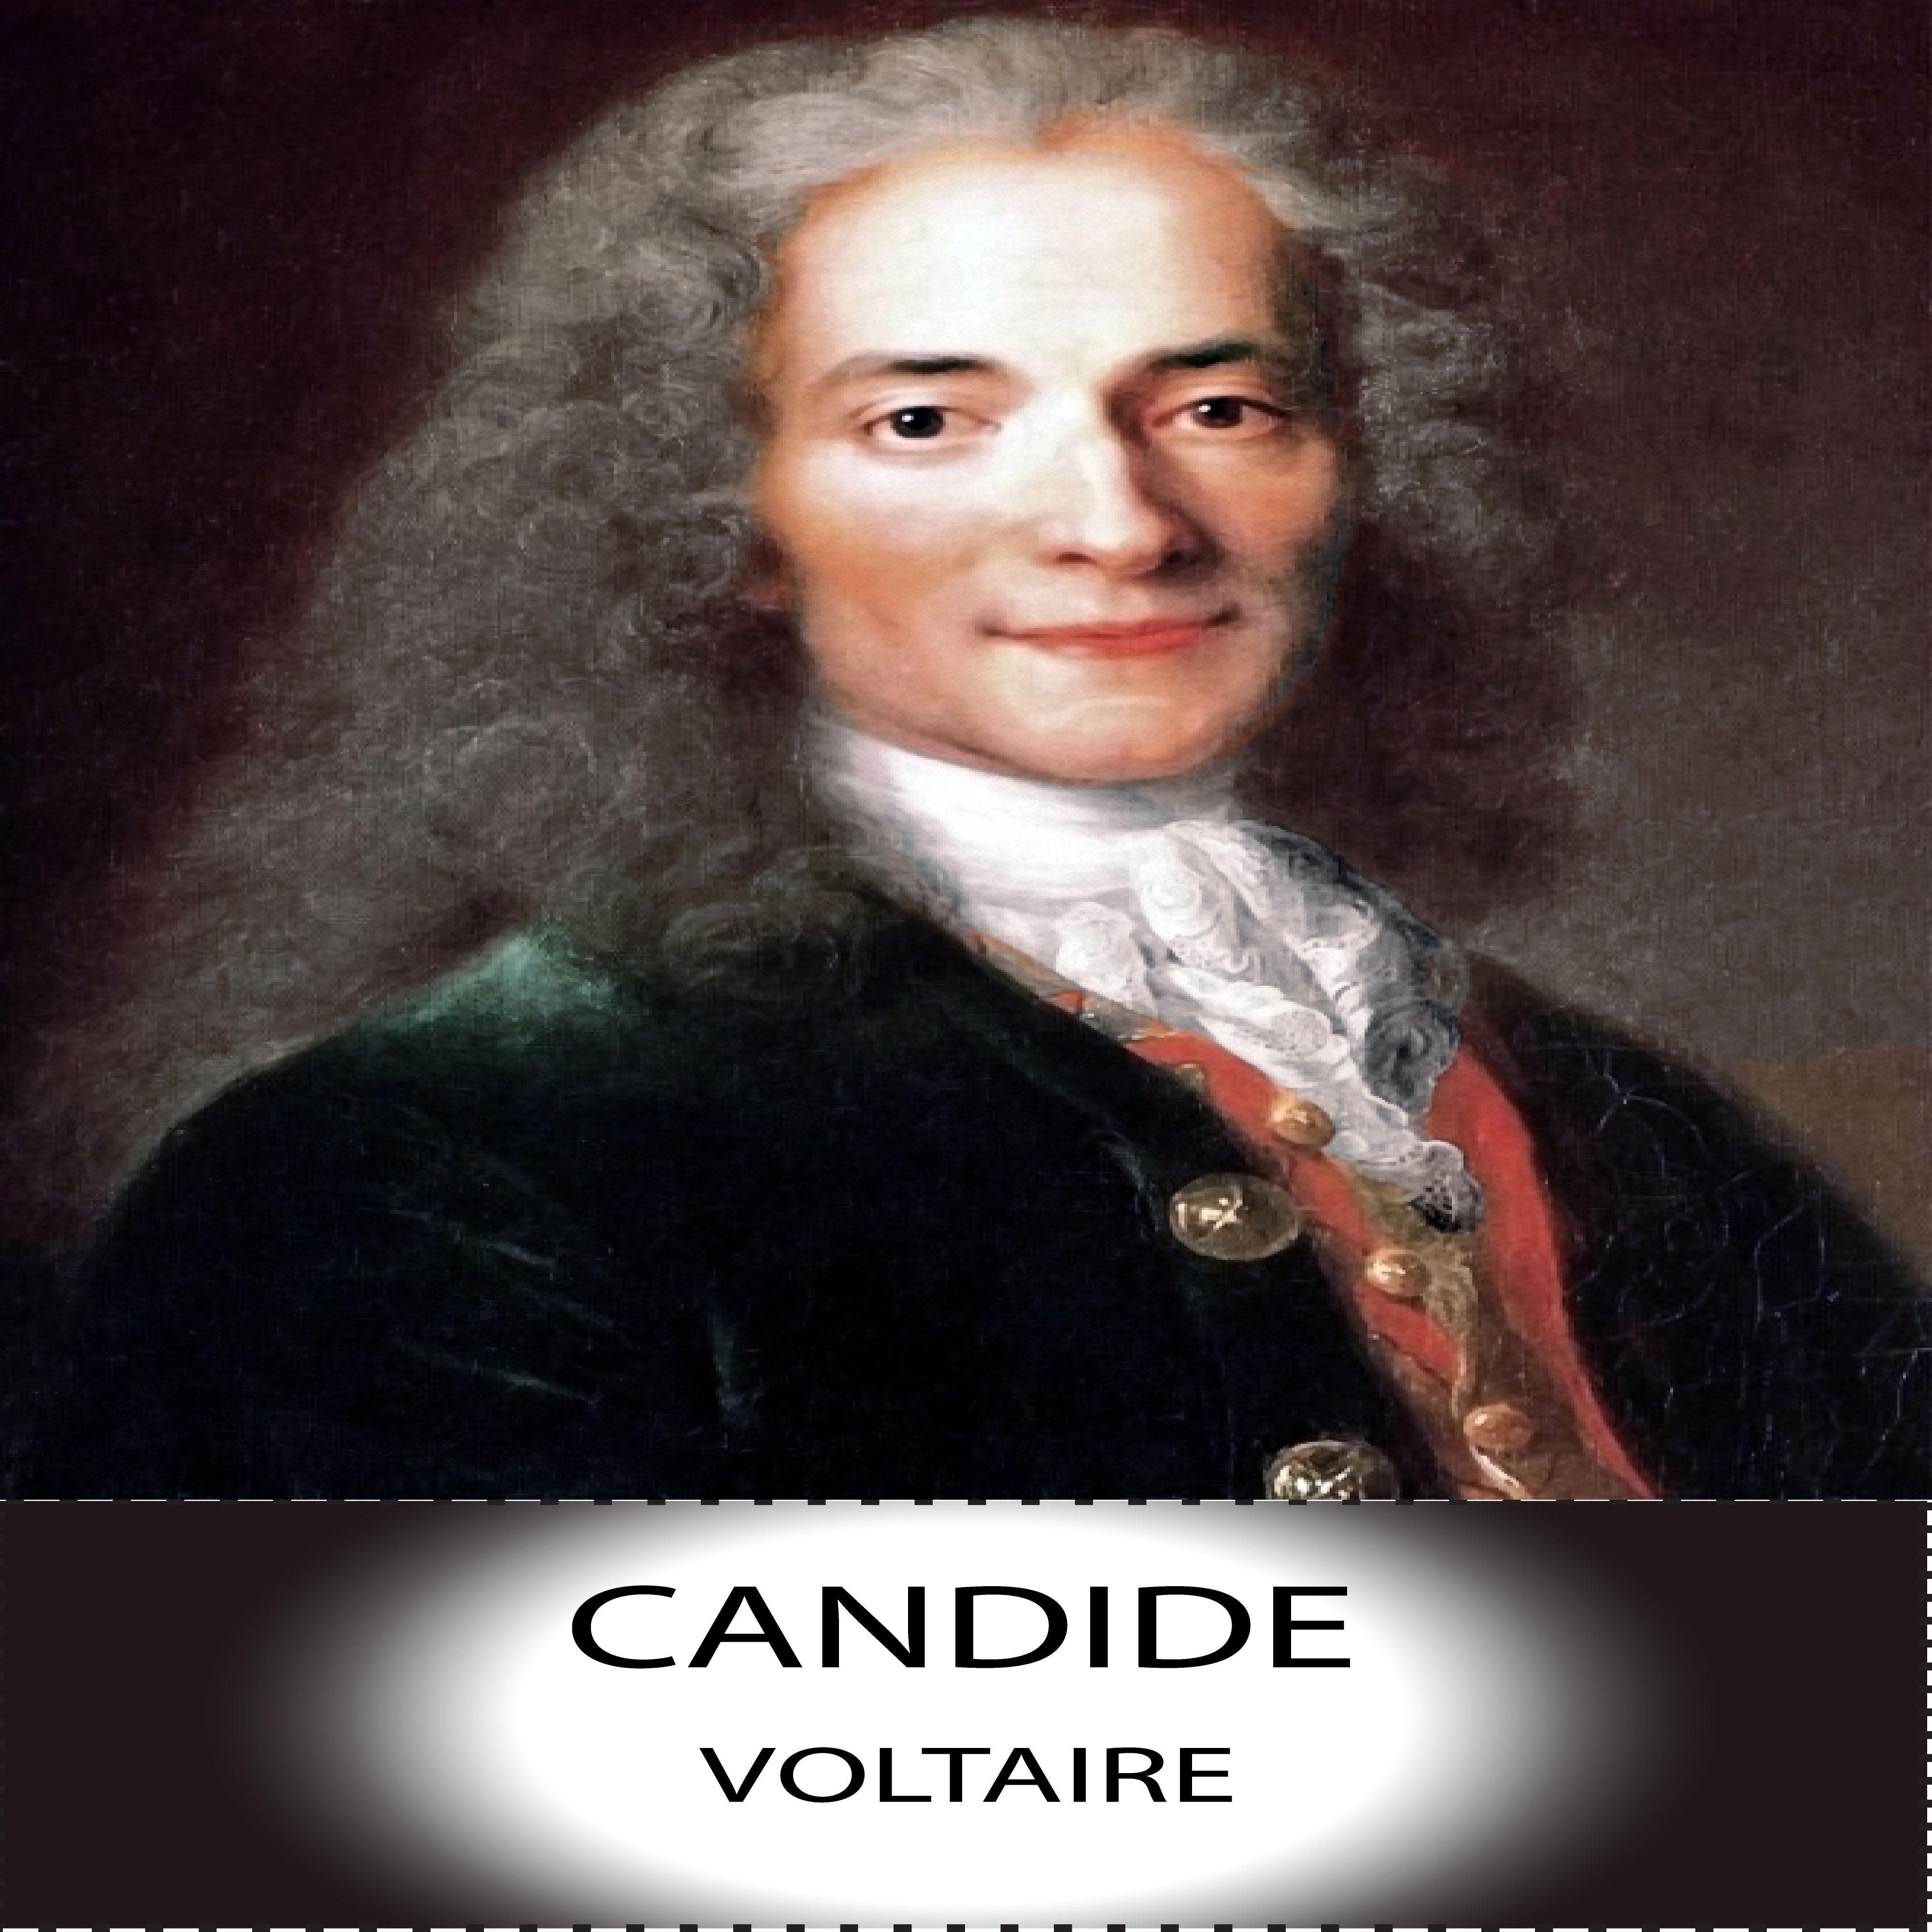 Voltaire: Candide, Chapter 19